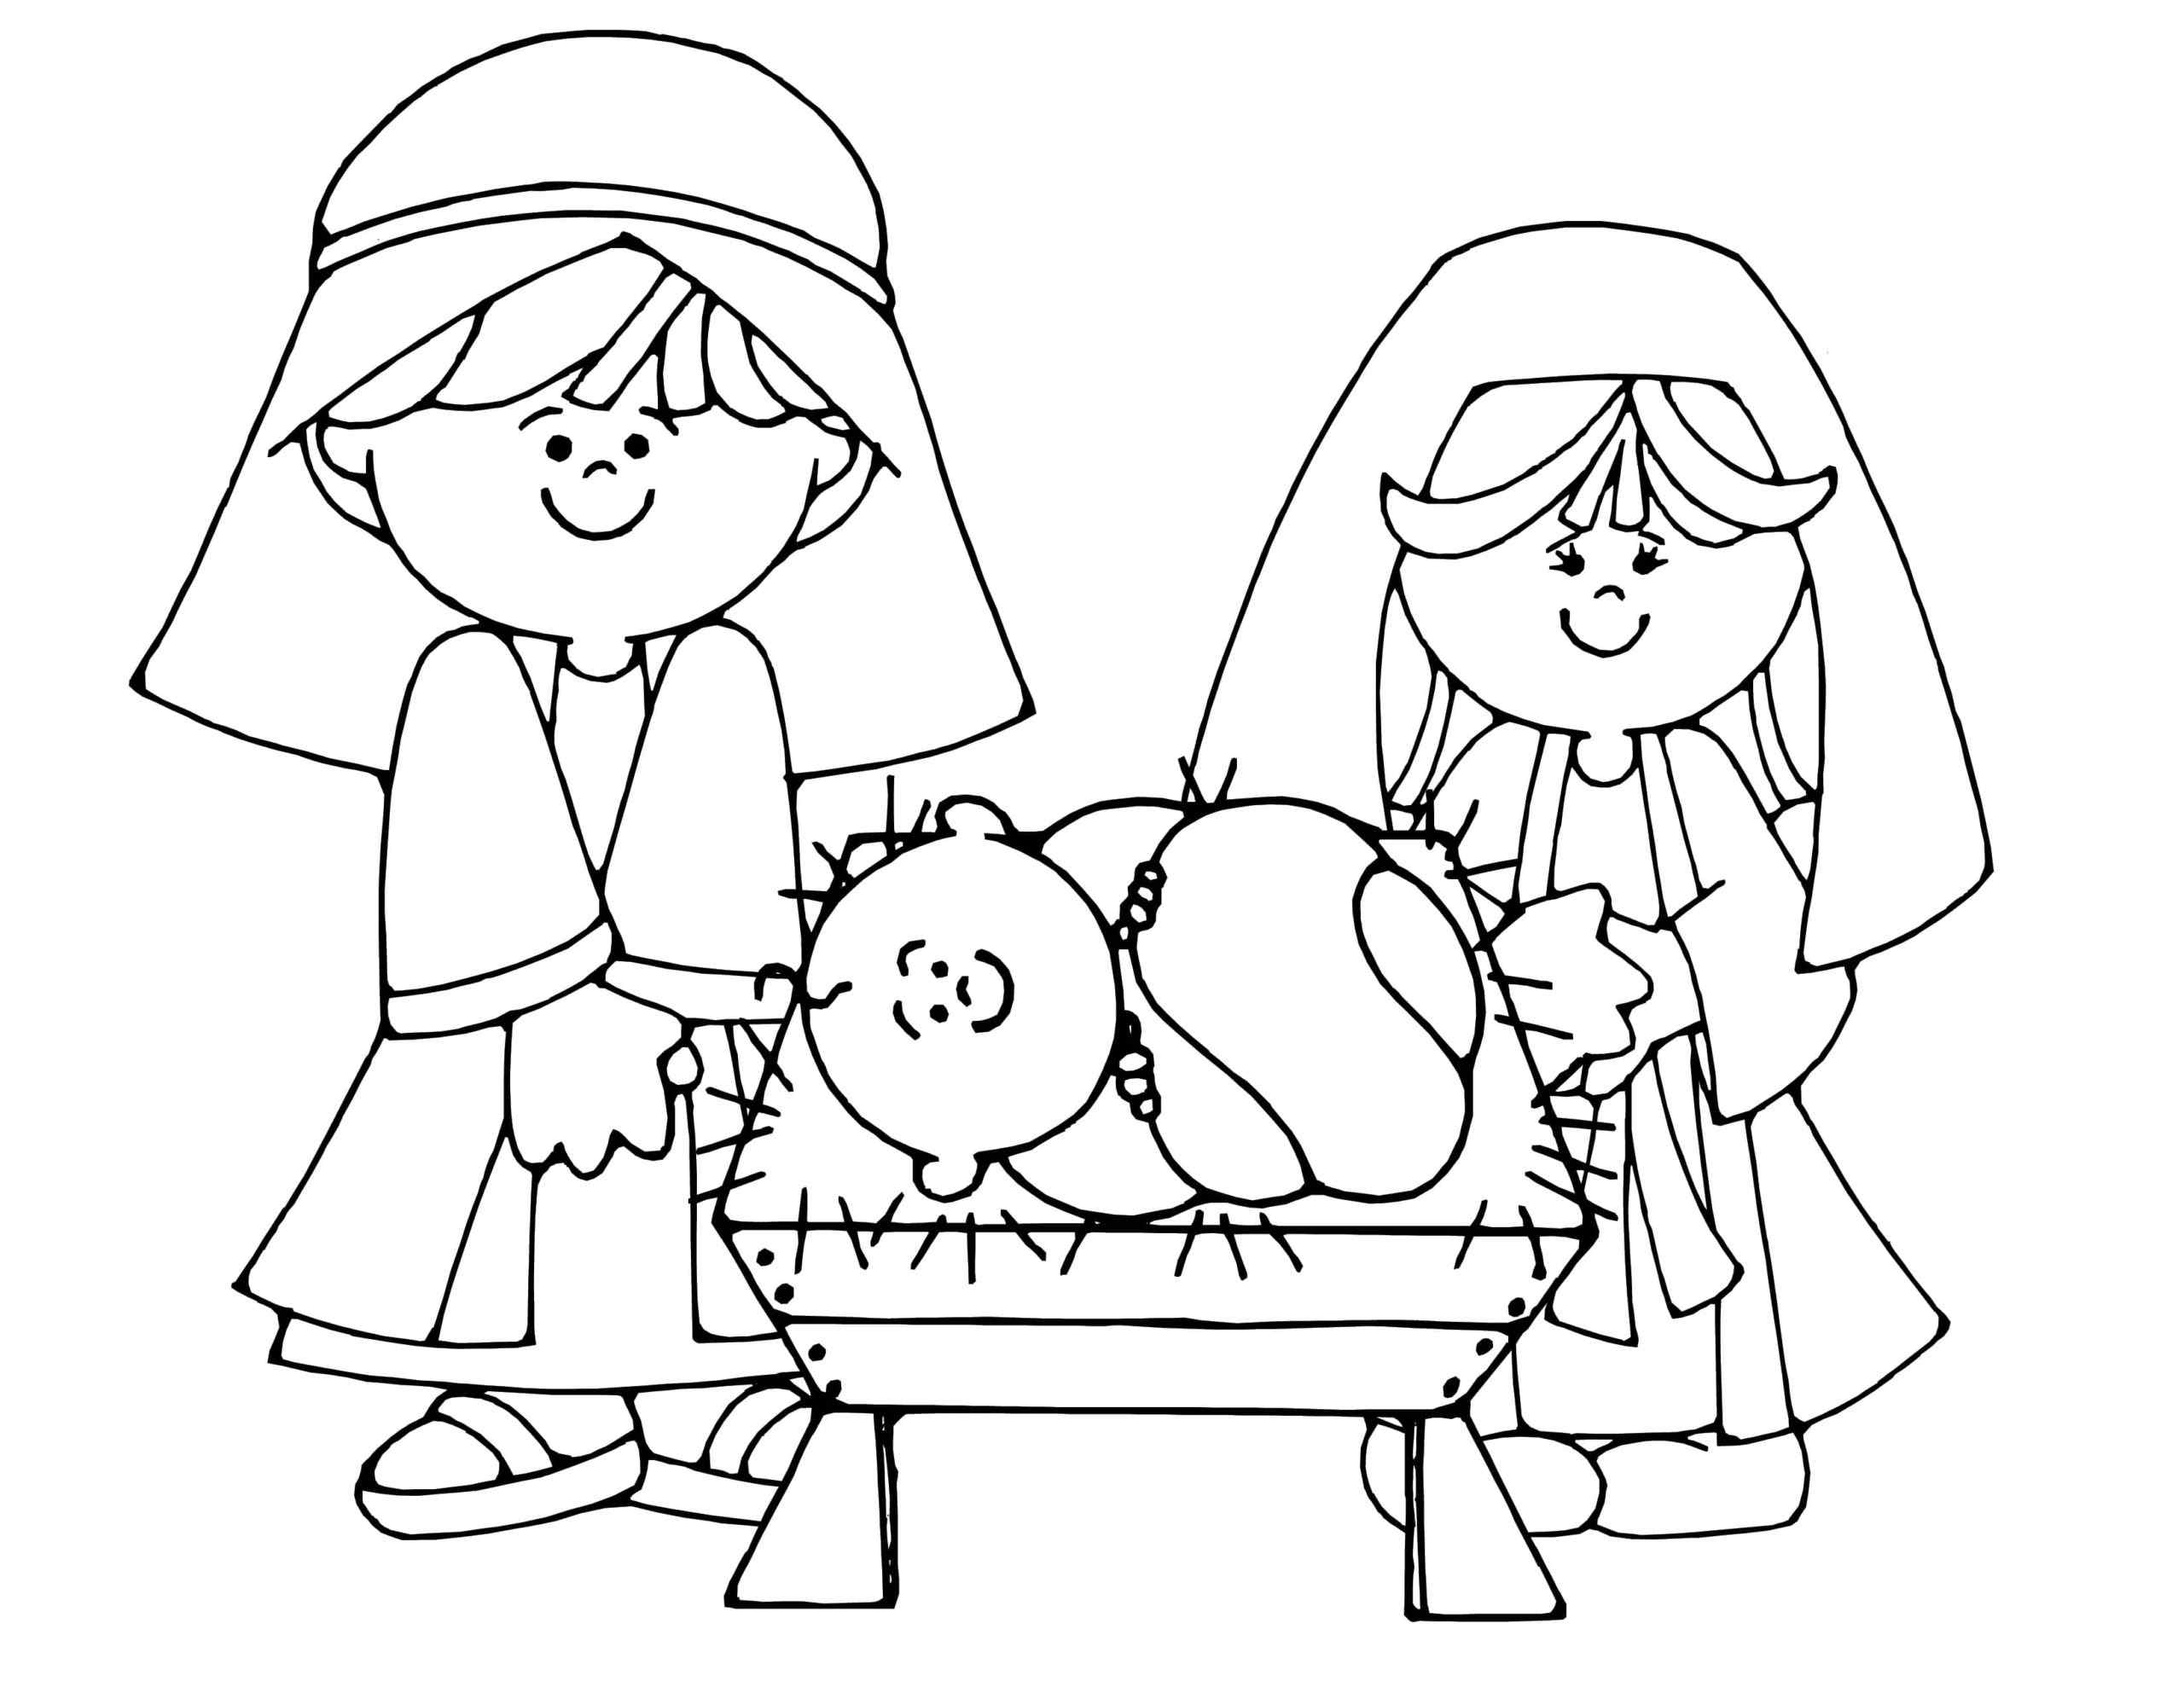 The Little Savior Of The World In Swaddling Clothes Coloring Page